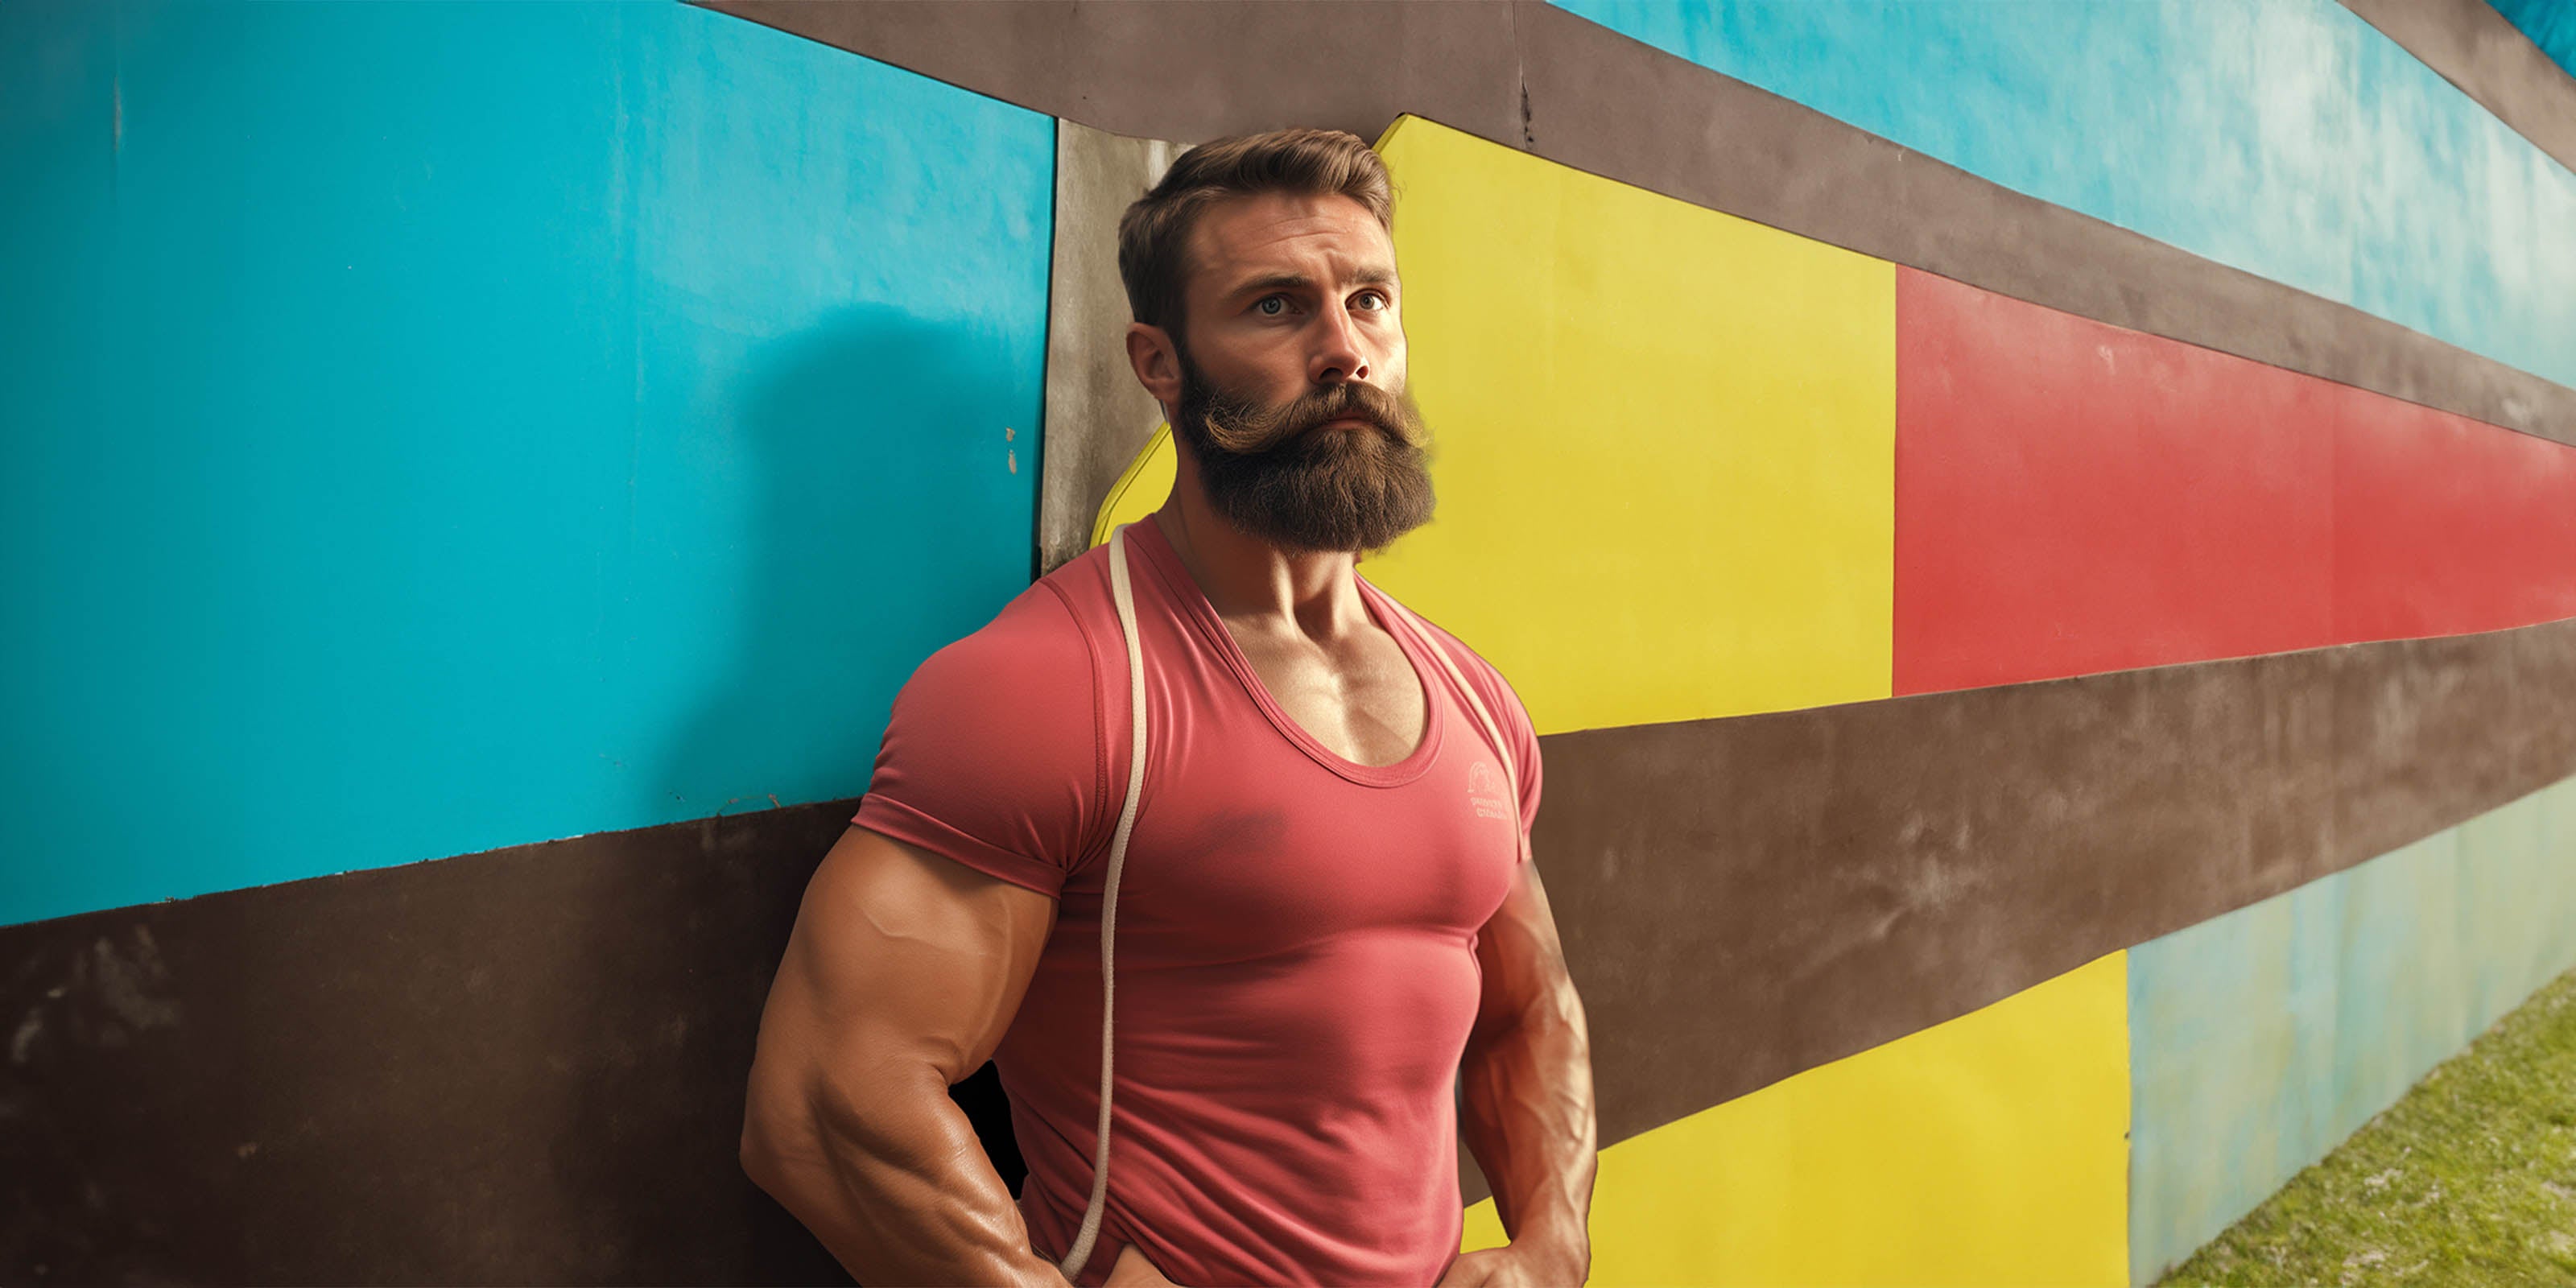 Man leaning against a bright colored wall in the gym